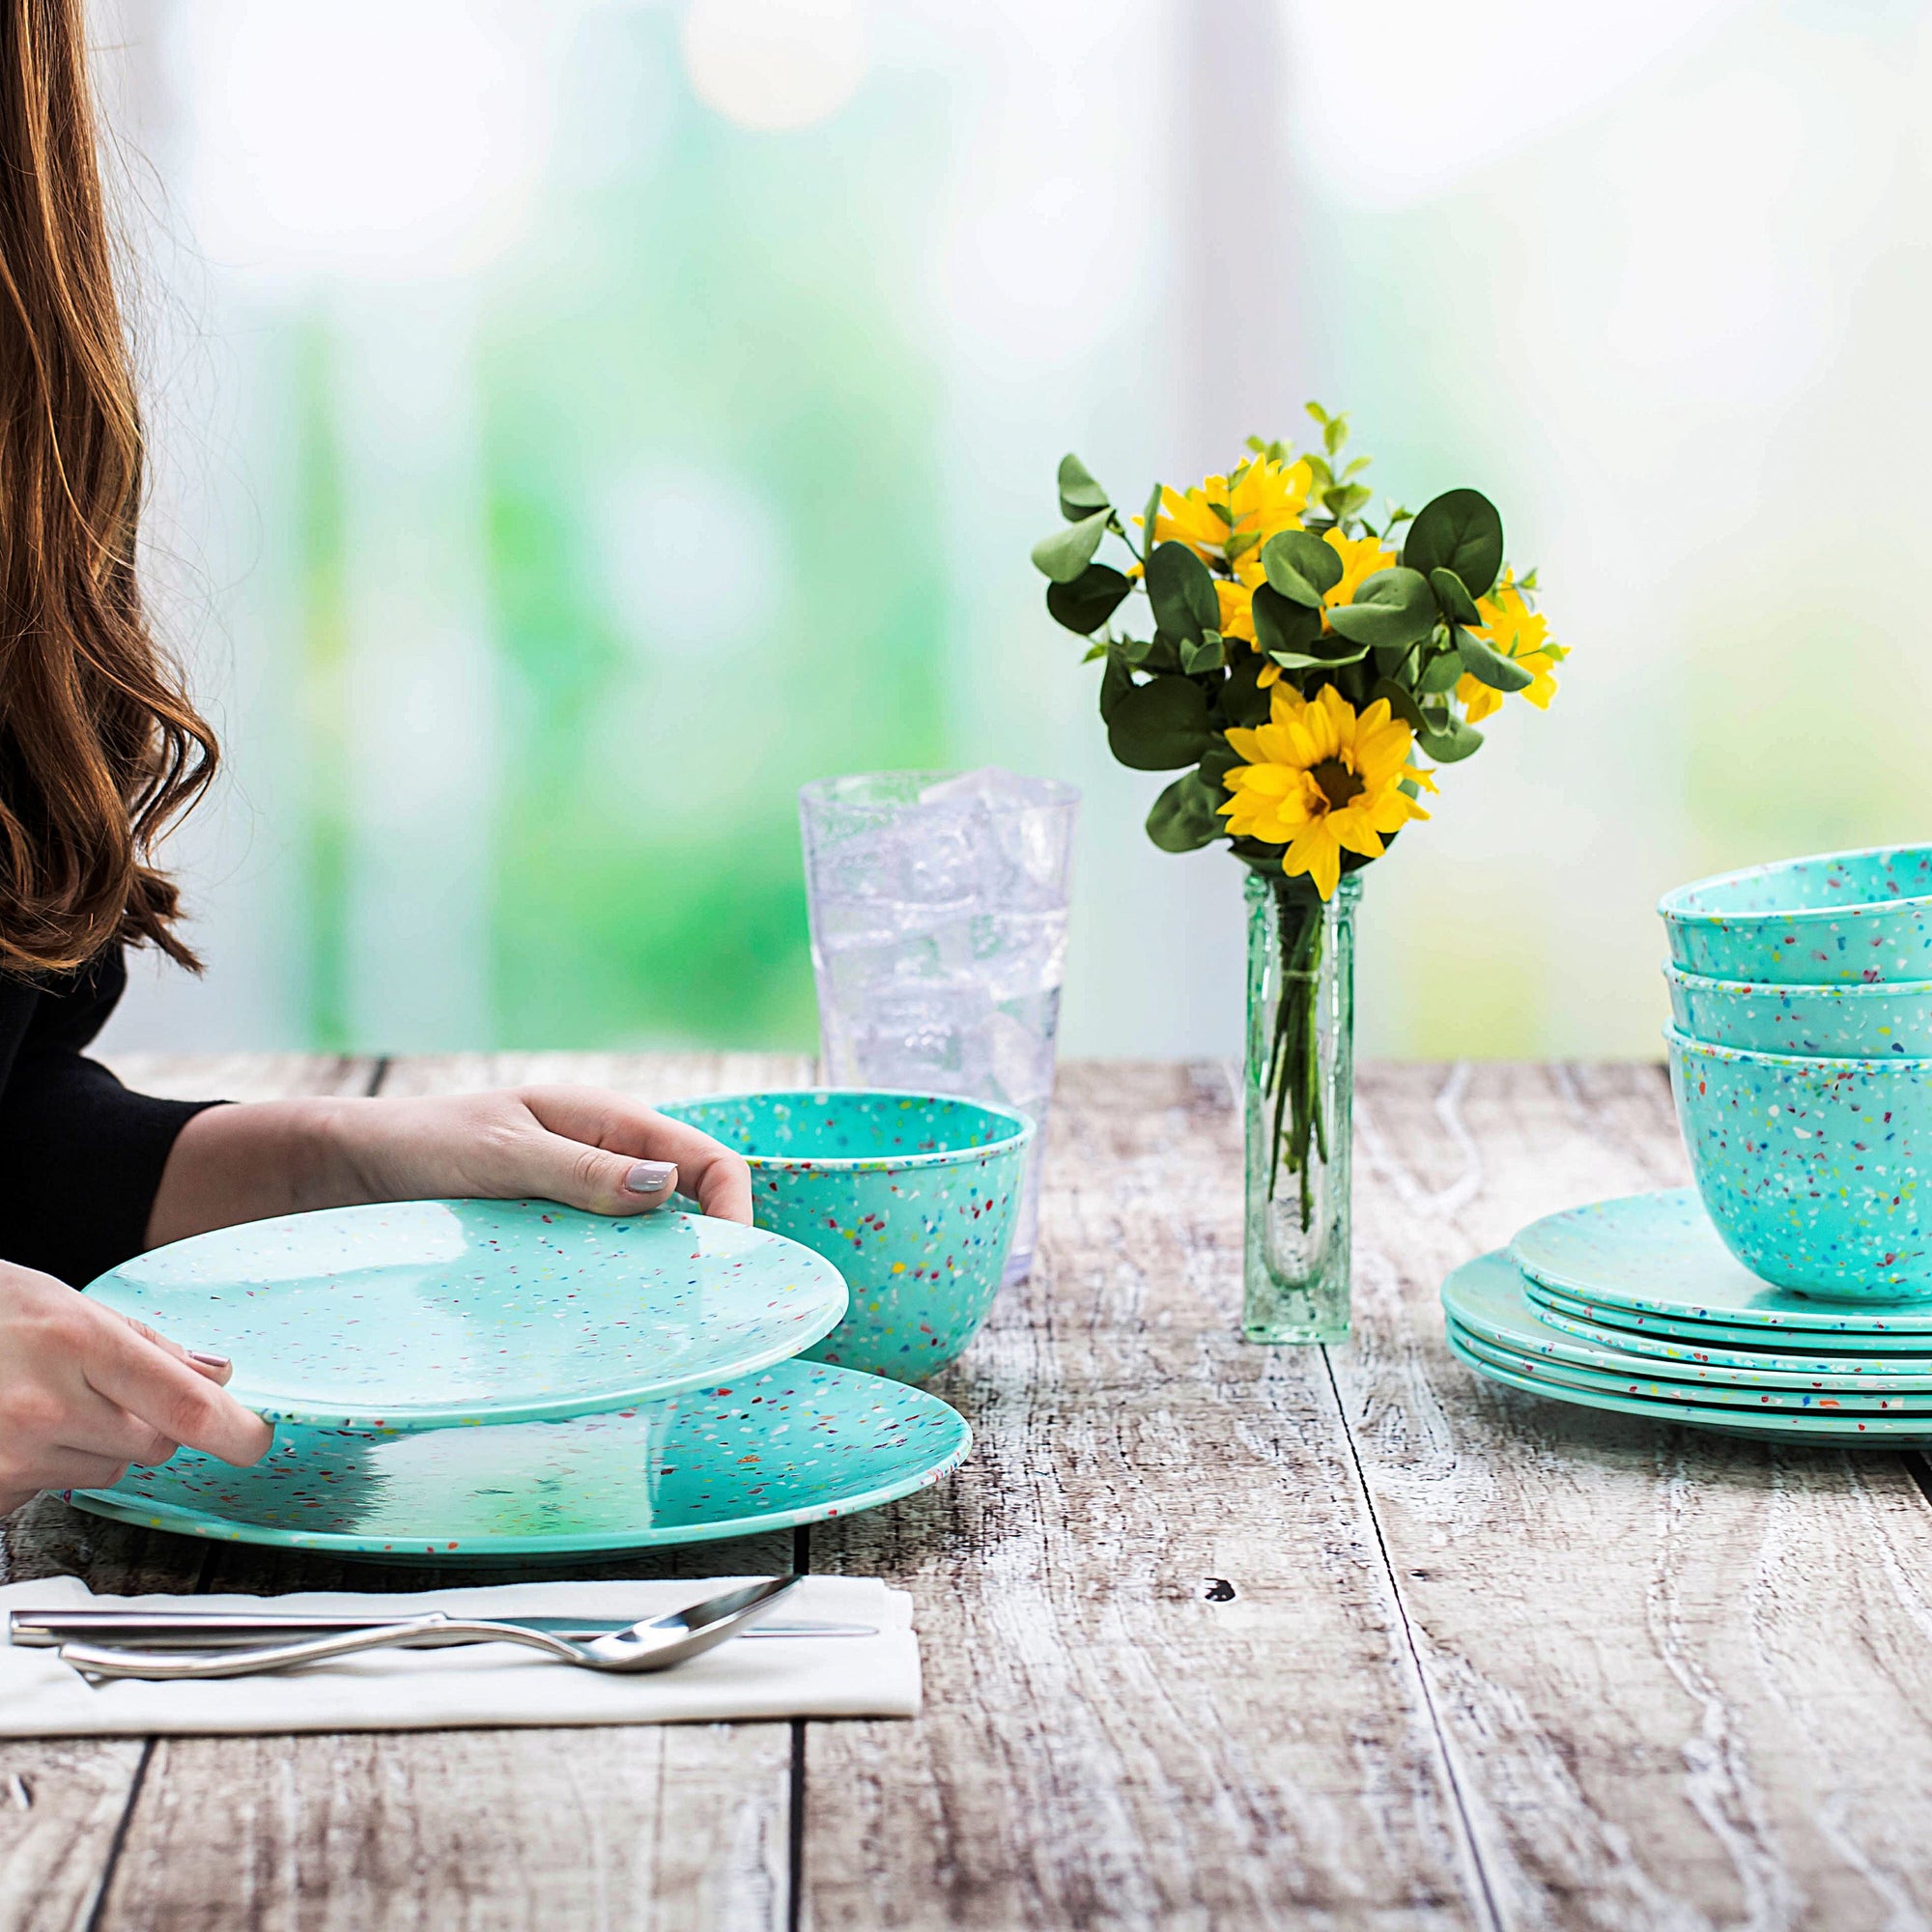 Confetti Melamine Dinnerware Set - Durable, Recycled Plates and Bowls, Mint Green